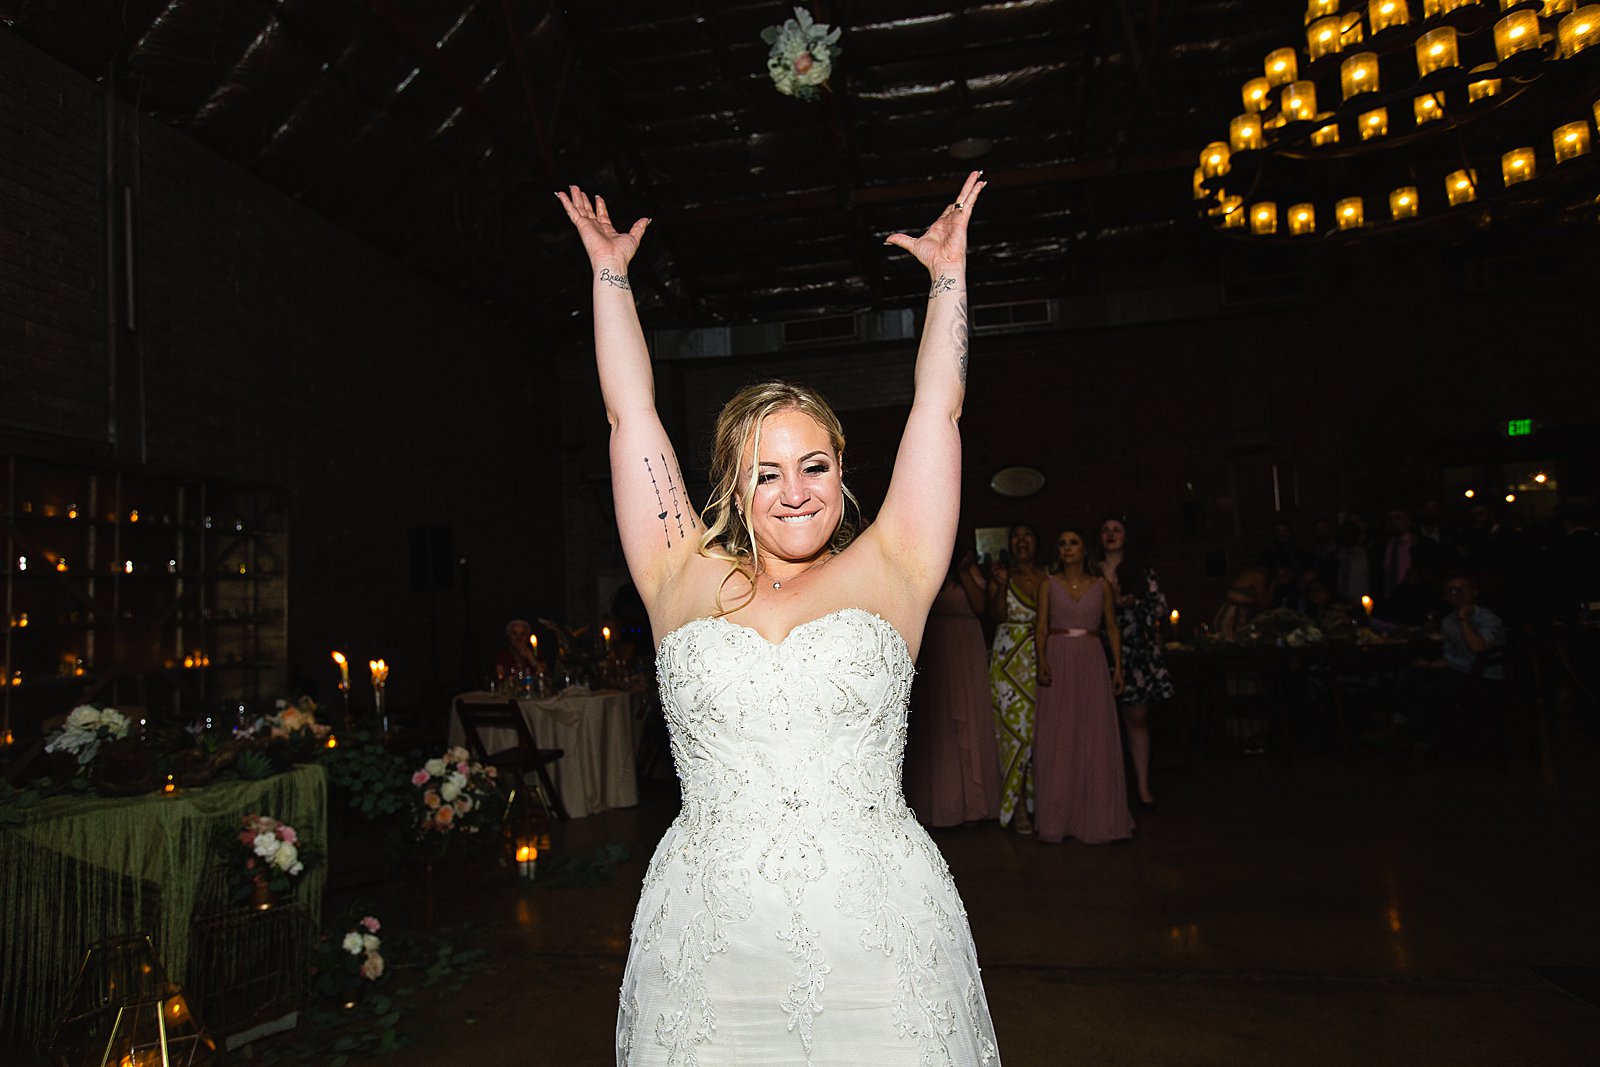 Bouquet toss at The Ice House wedding reception by Phoenix wedding photographer PMA Photography.